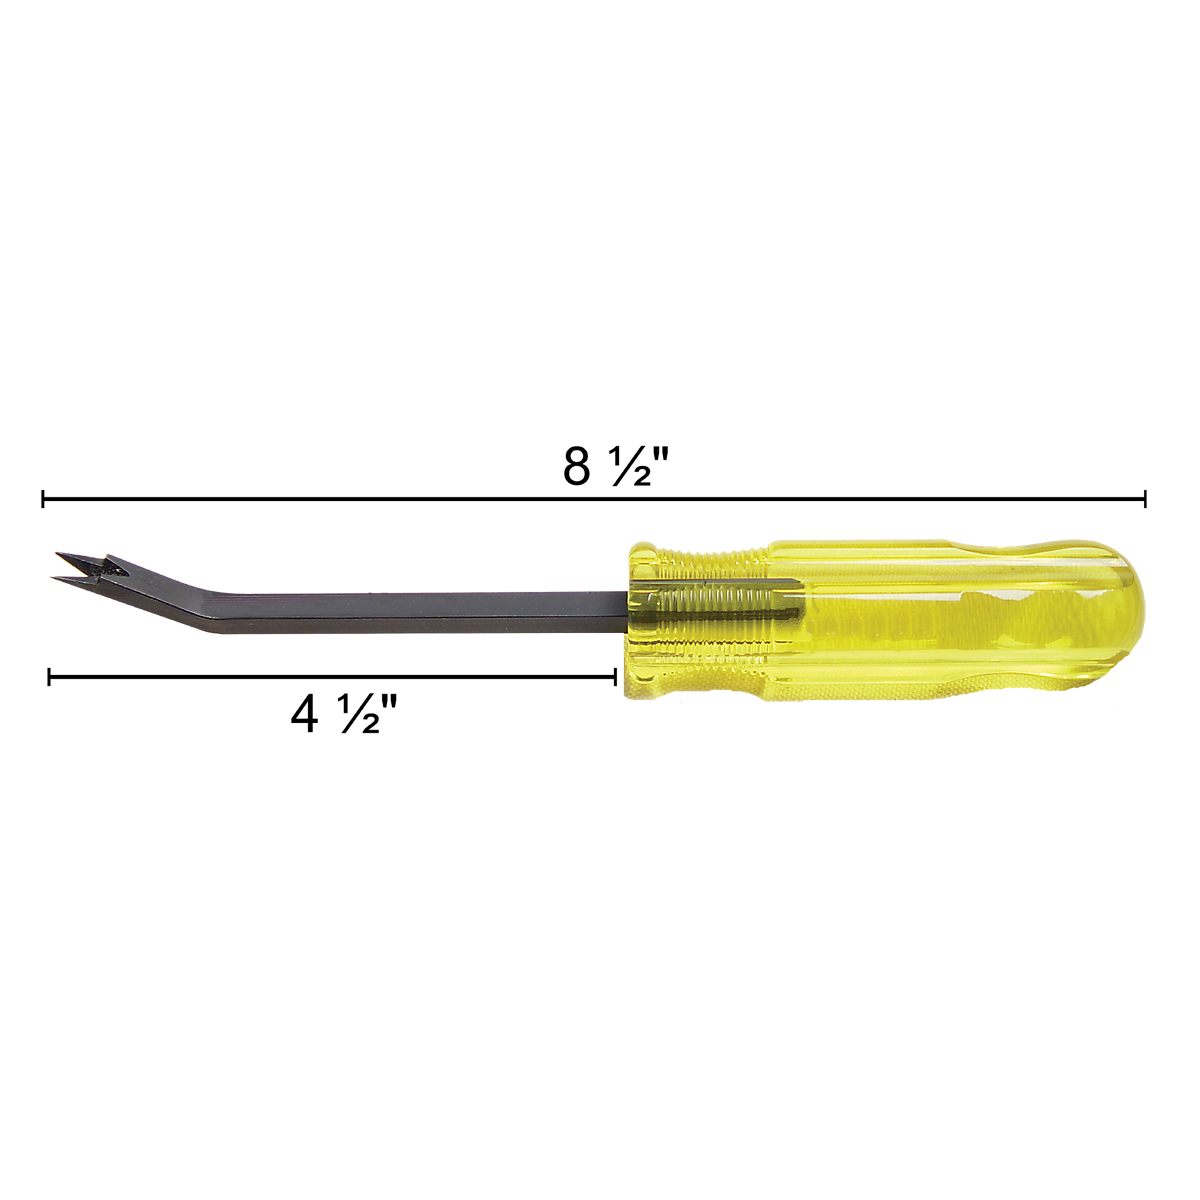  C.S. Osborne 124 Staple Remover 124 Upholstery Tools : Office  Products